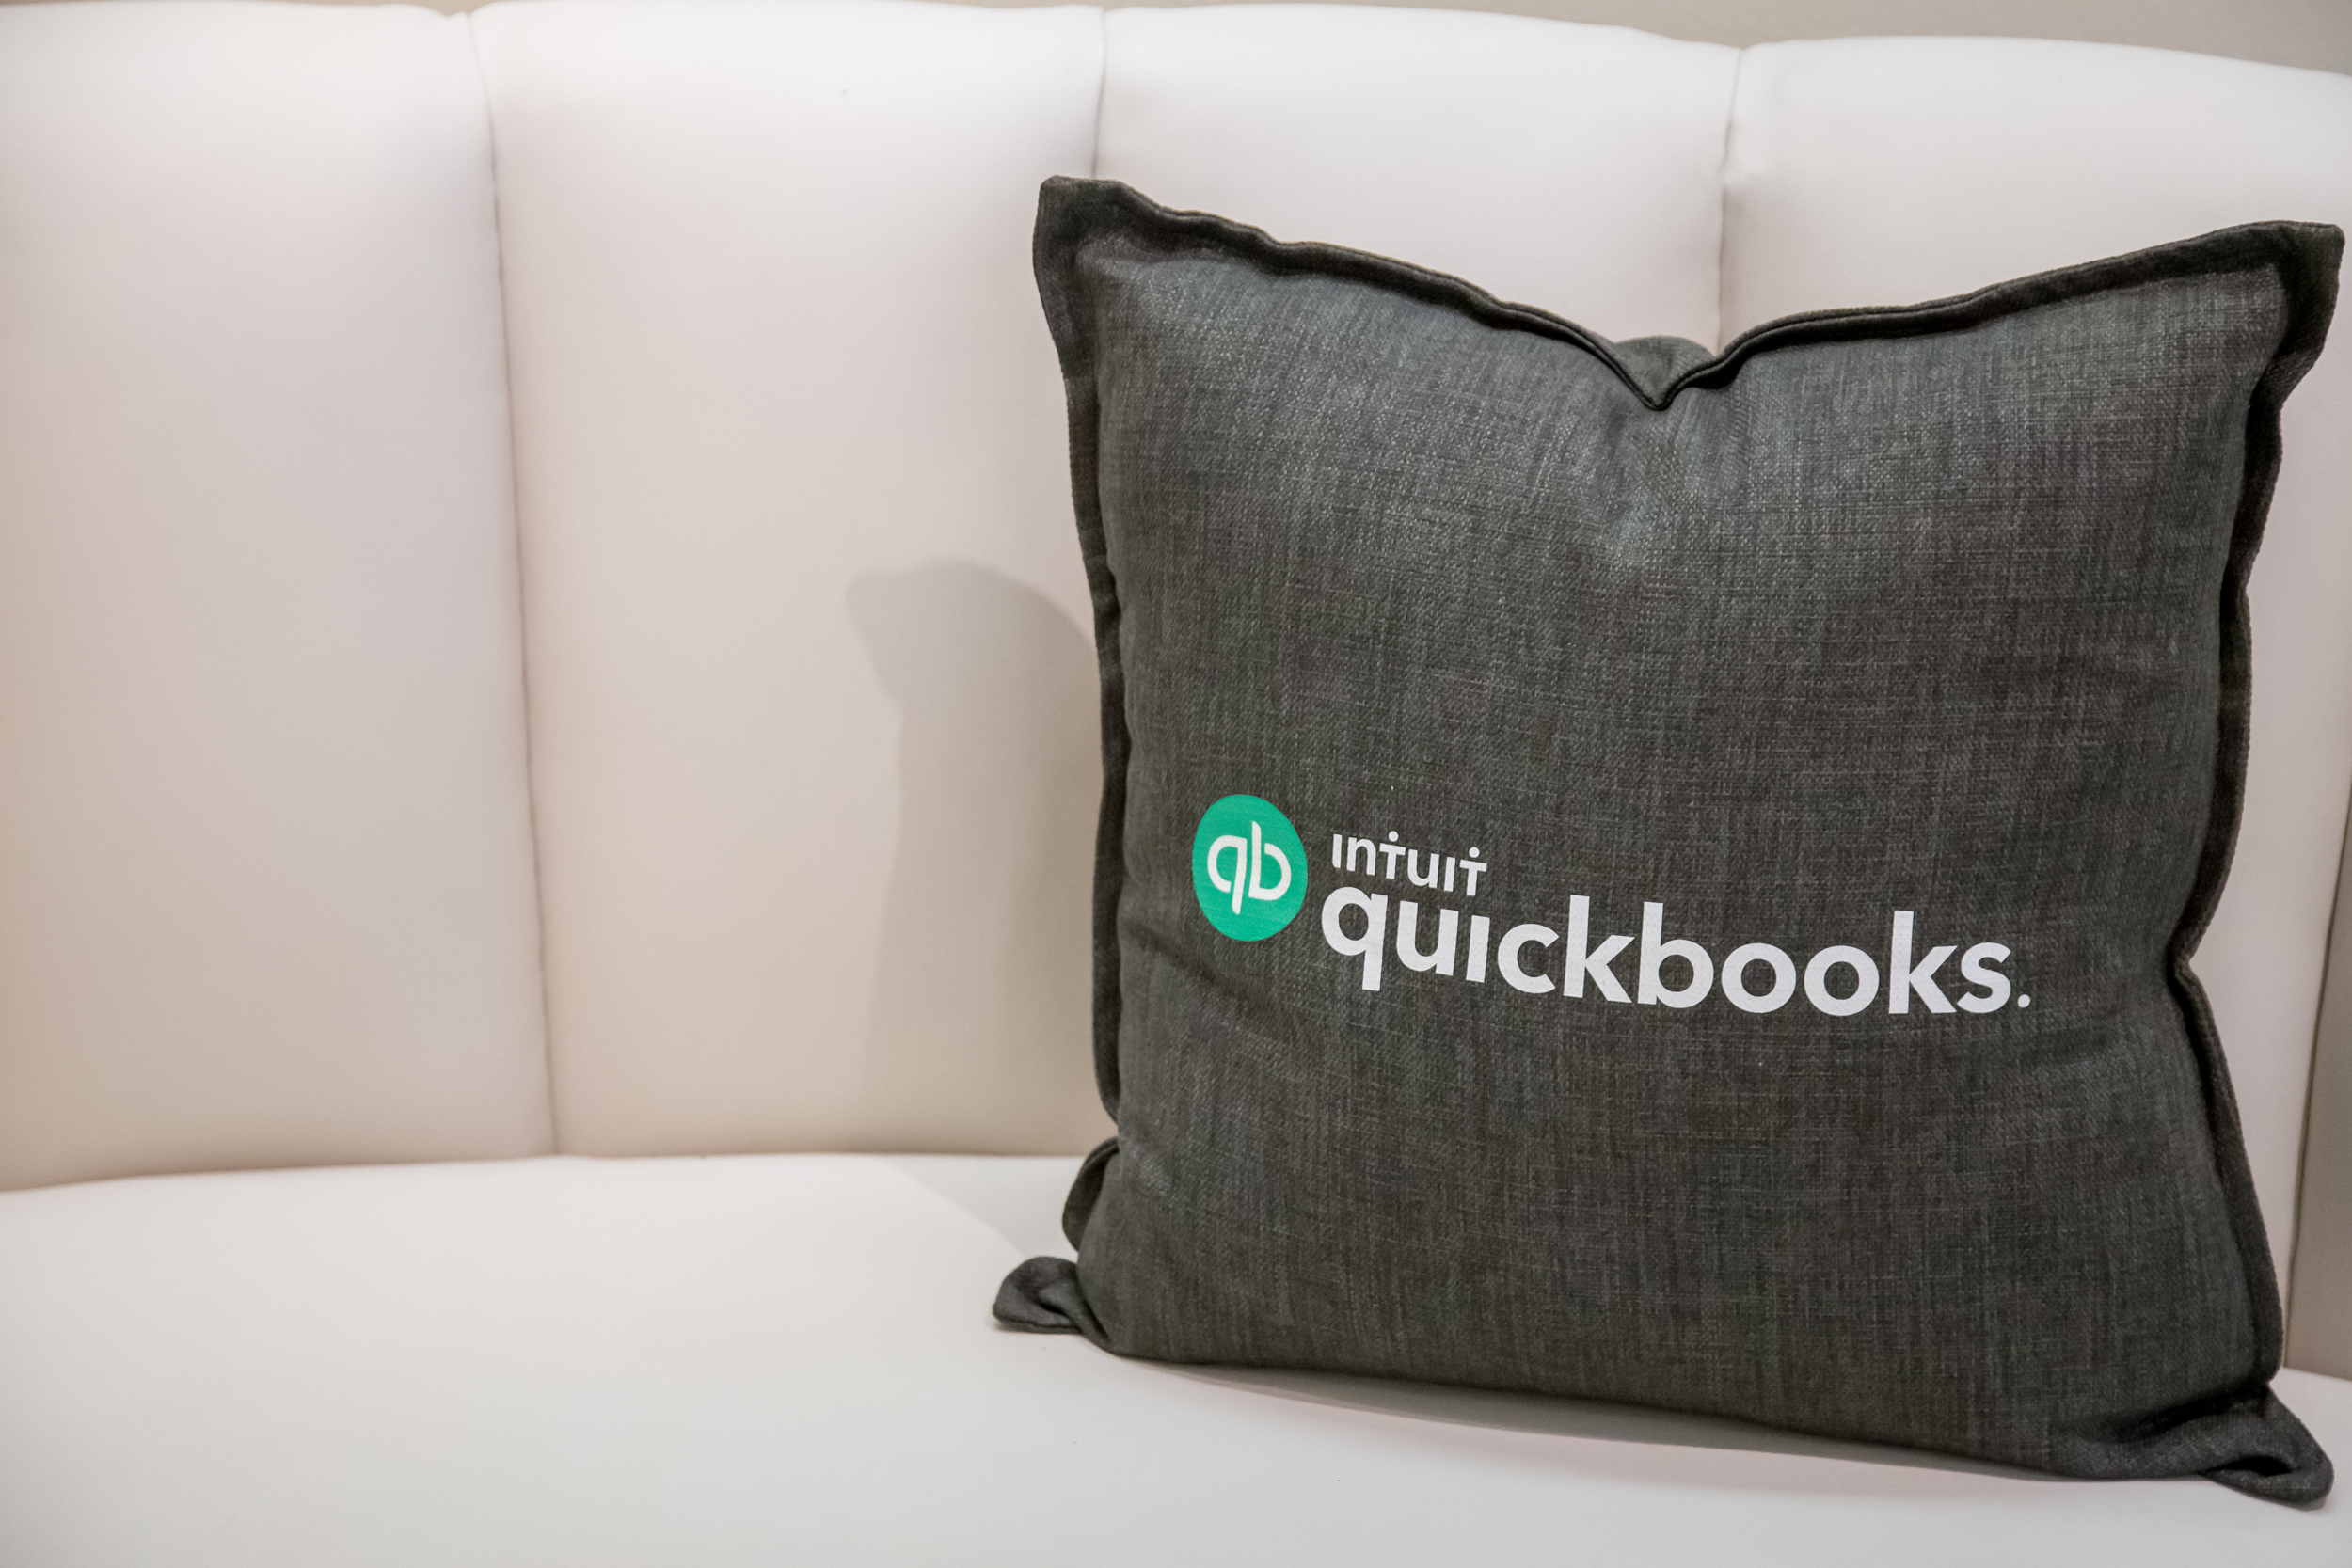 QuickBooks brander pillow on a couch